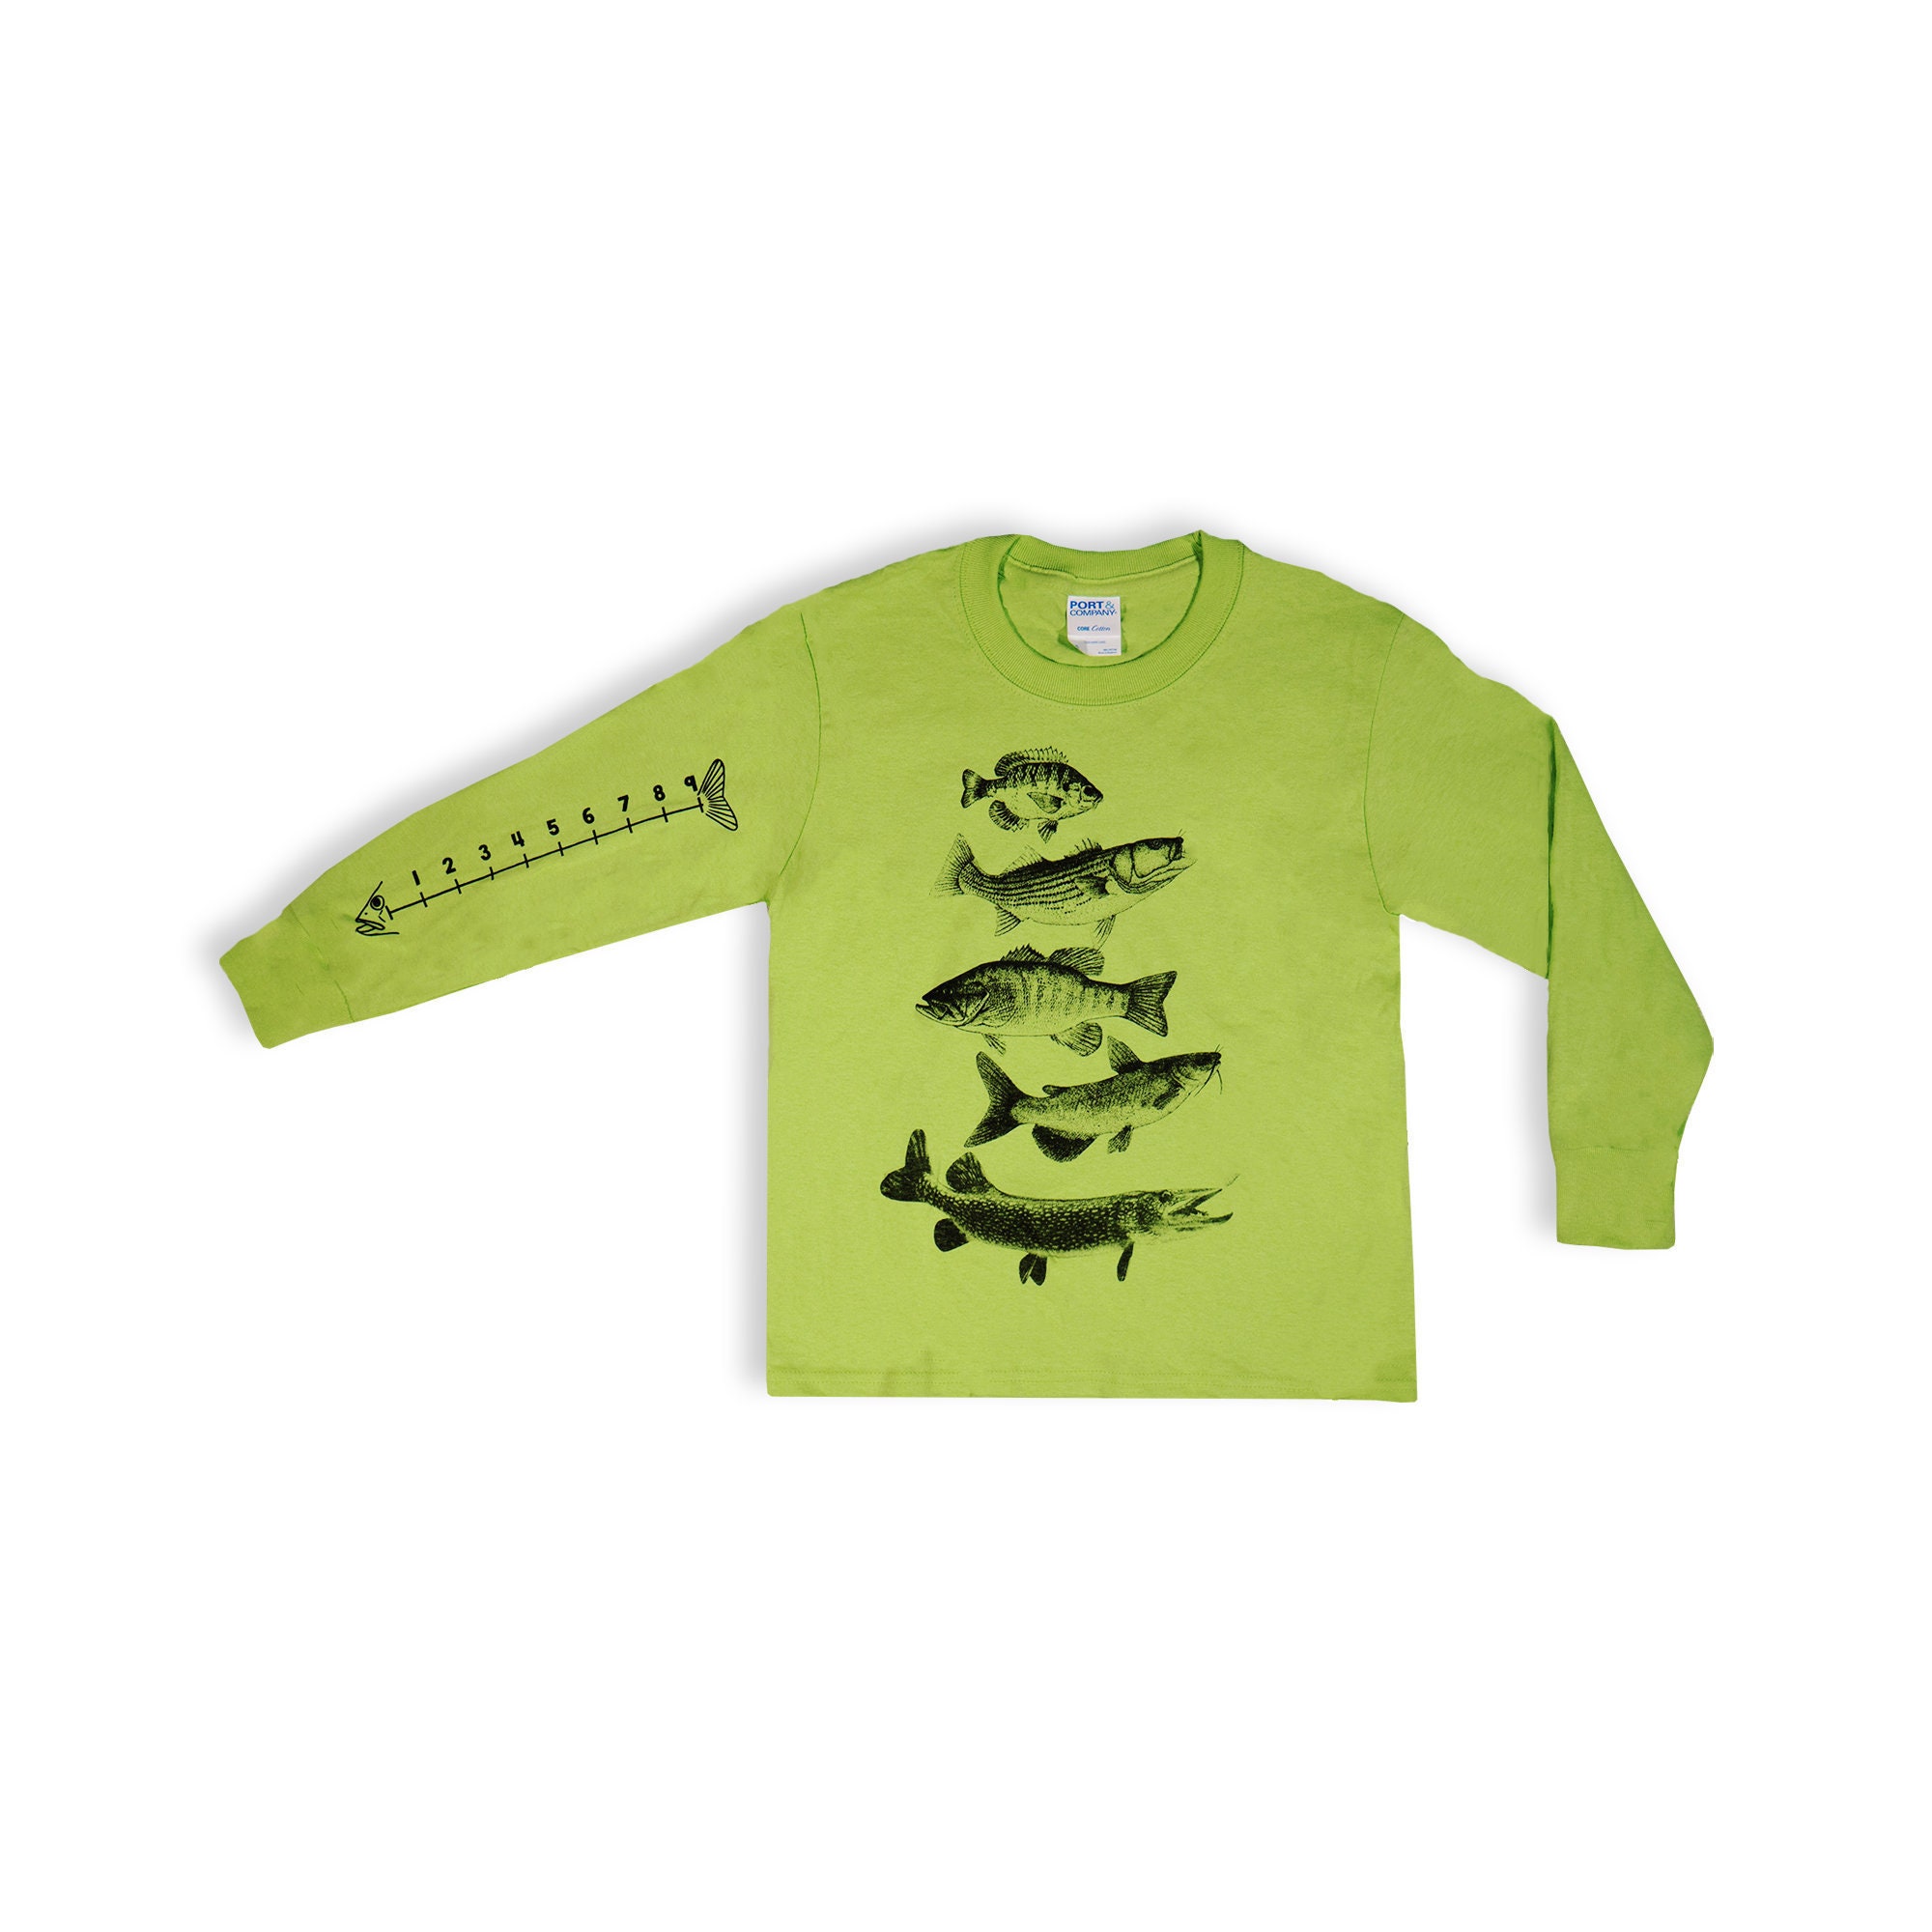 Cotton Kids Fishing Shirt With Ruler to Measure Fish Youth Sizes 